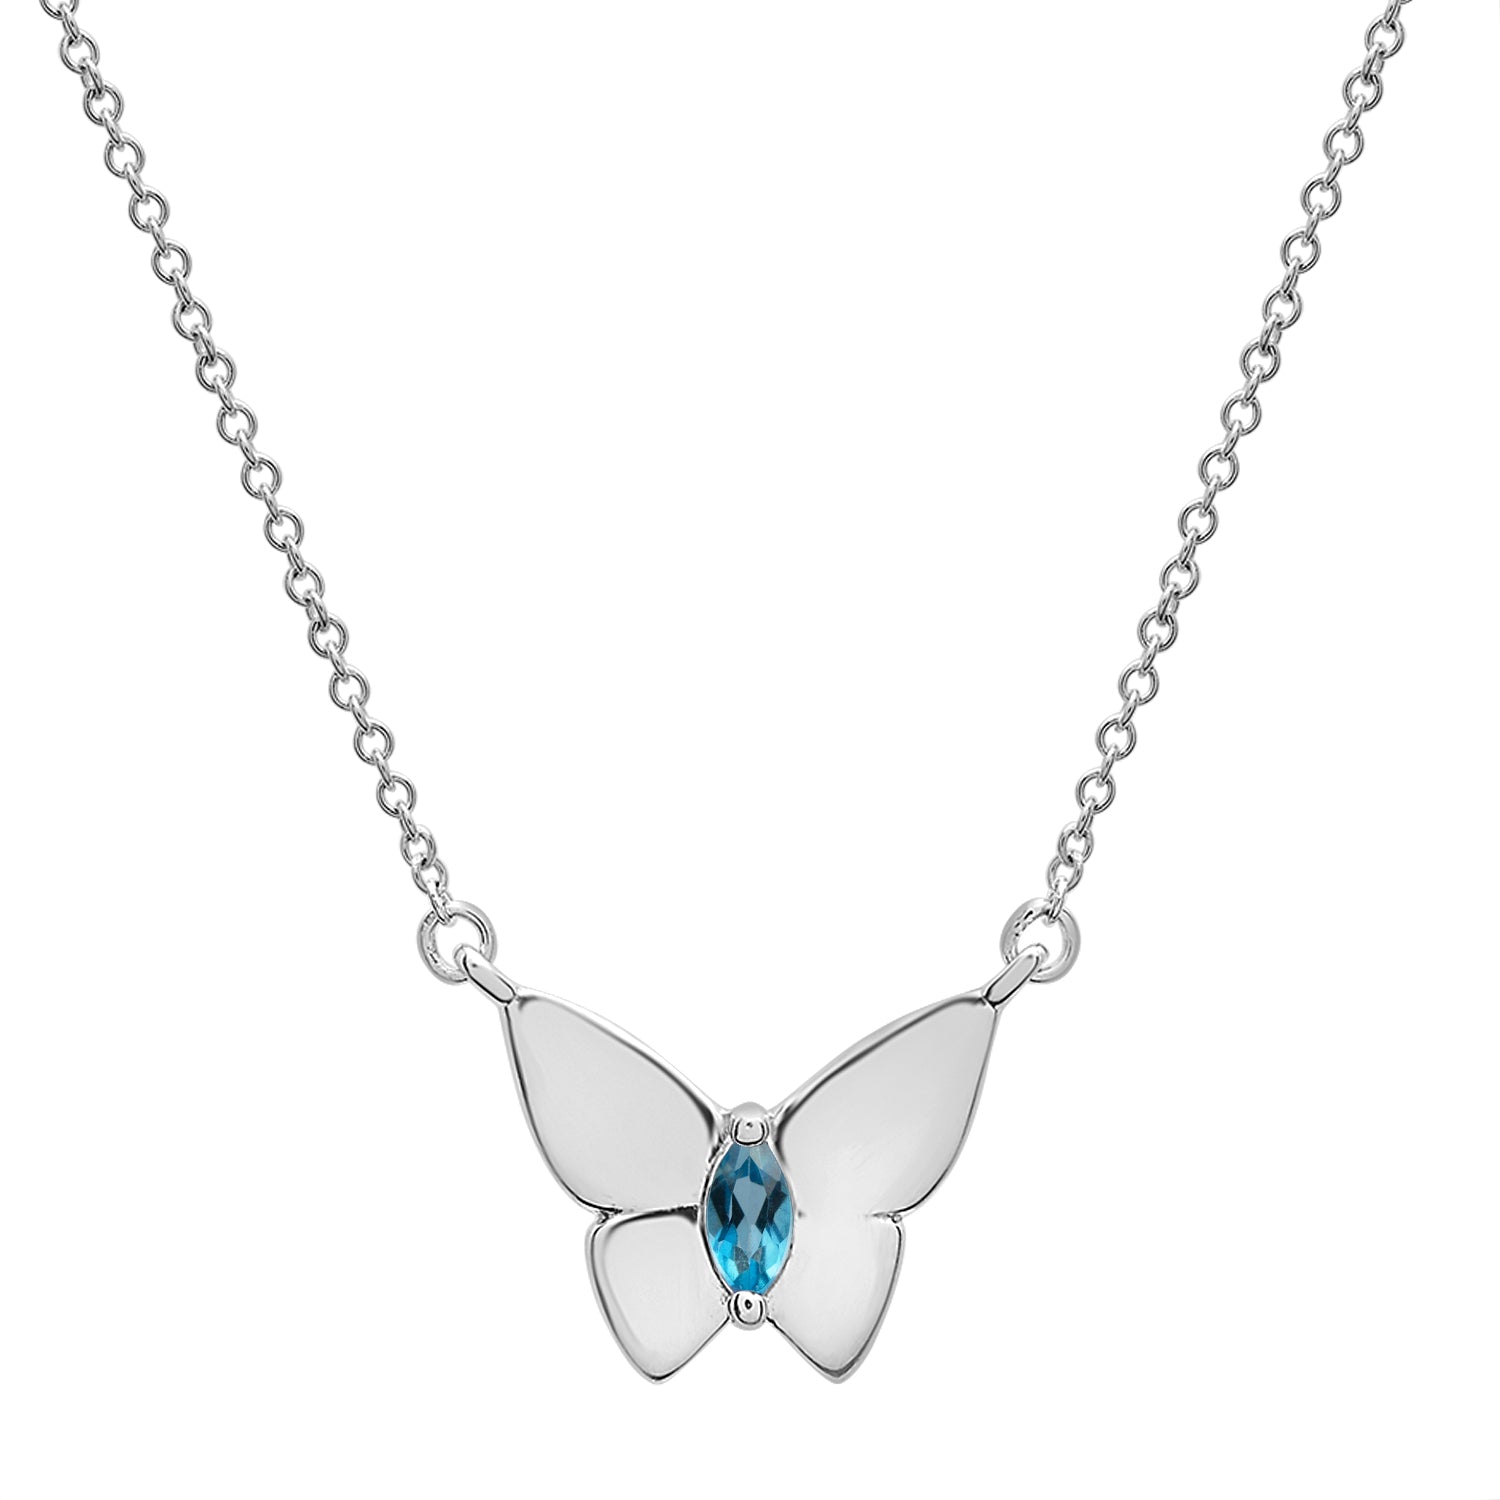 Sky Blue Stone Butterfly Birthstone Necklace with Silver chain